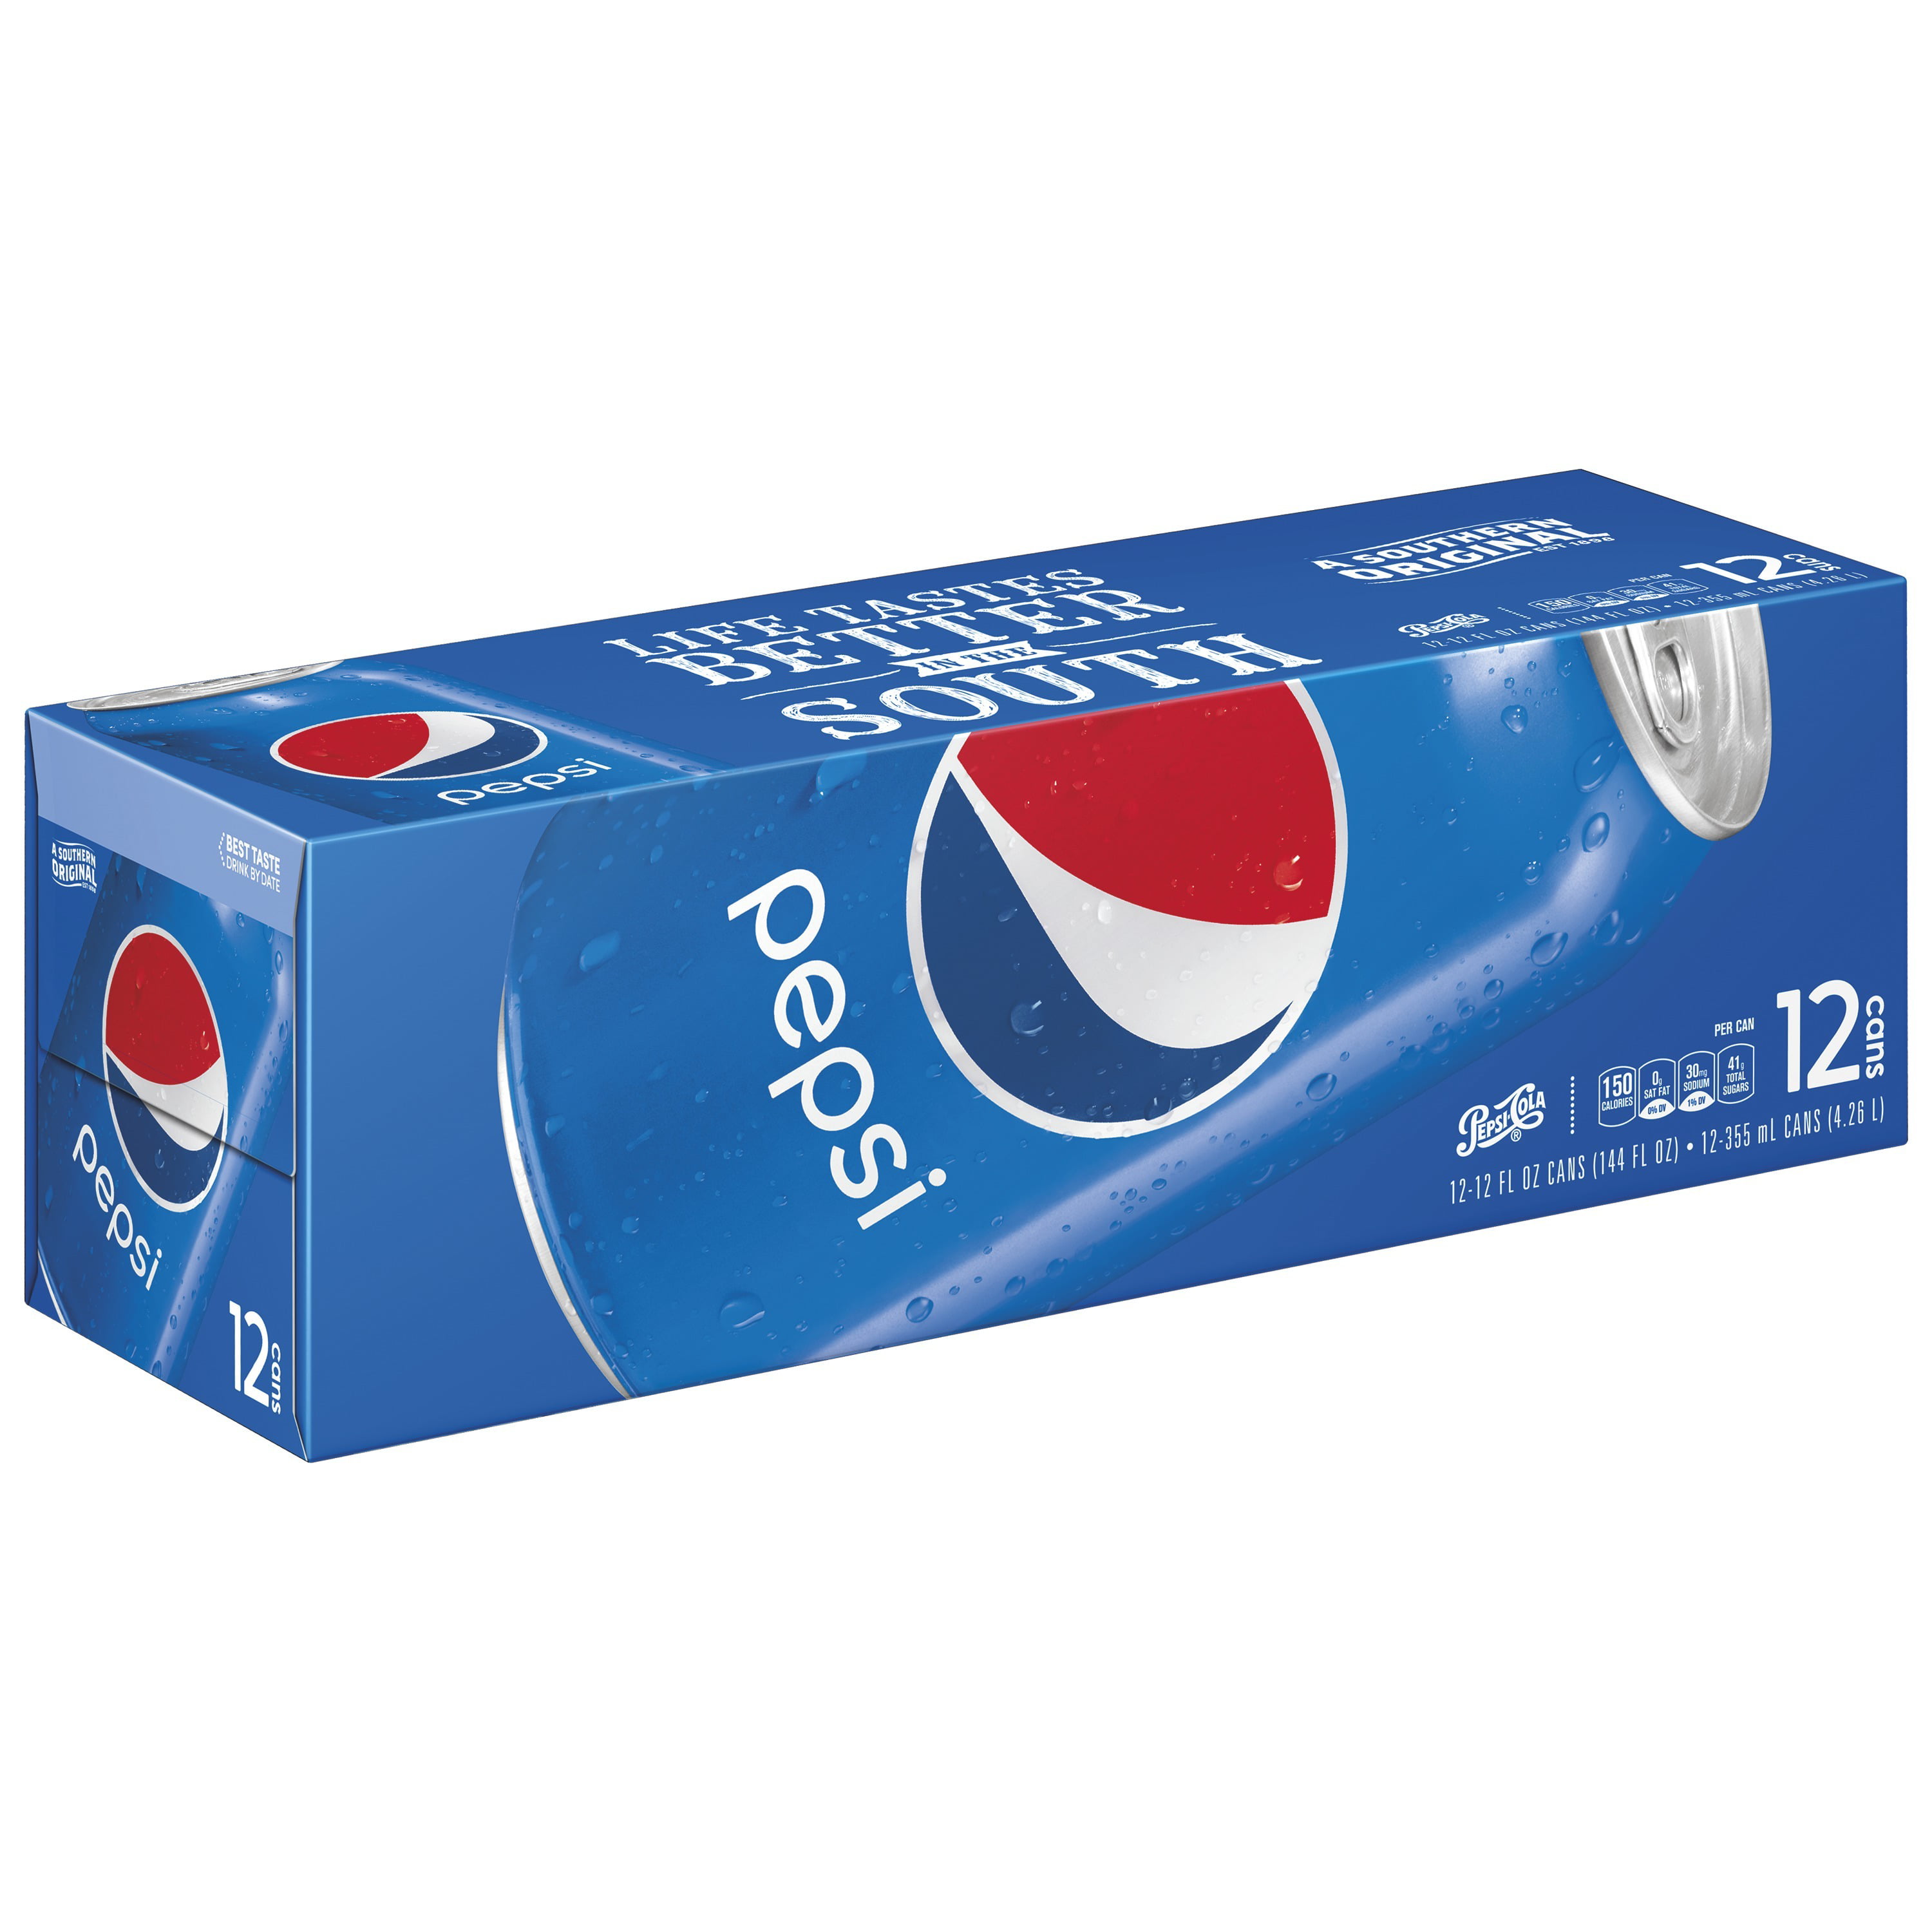 How much is a 24 pack of pepsi at walmart 12 Cans Pepsi Soda 12 Fl Oz Walmart Com Walmart Com